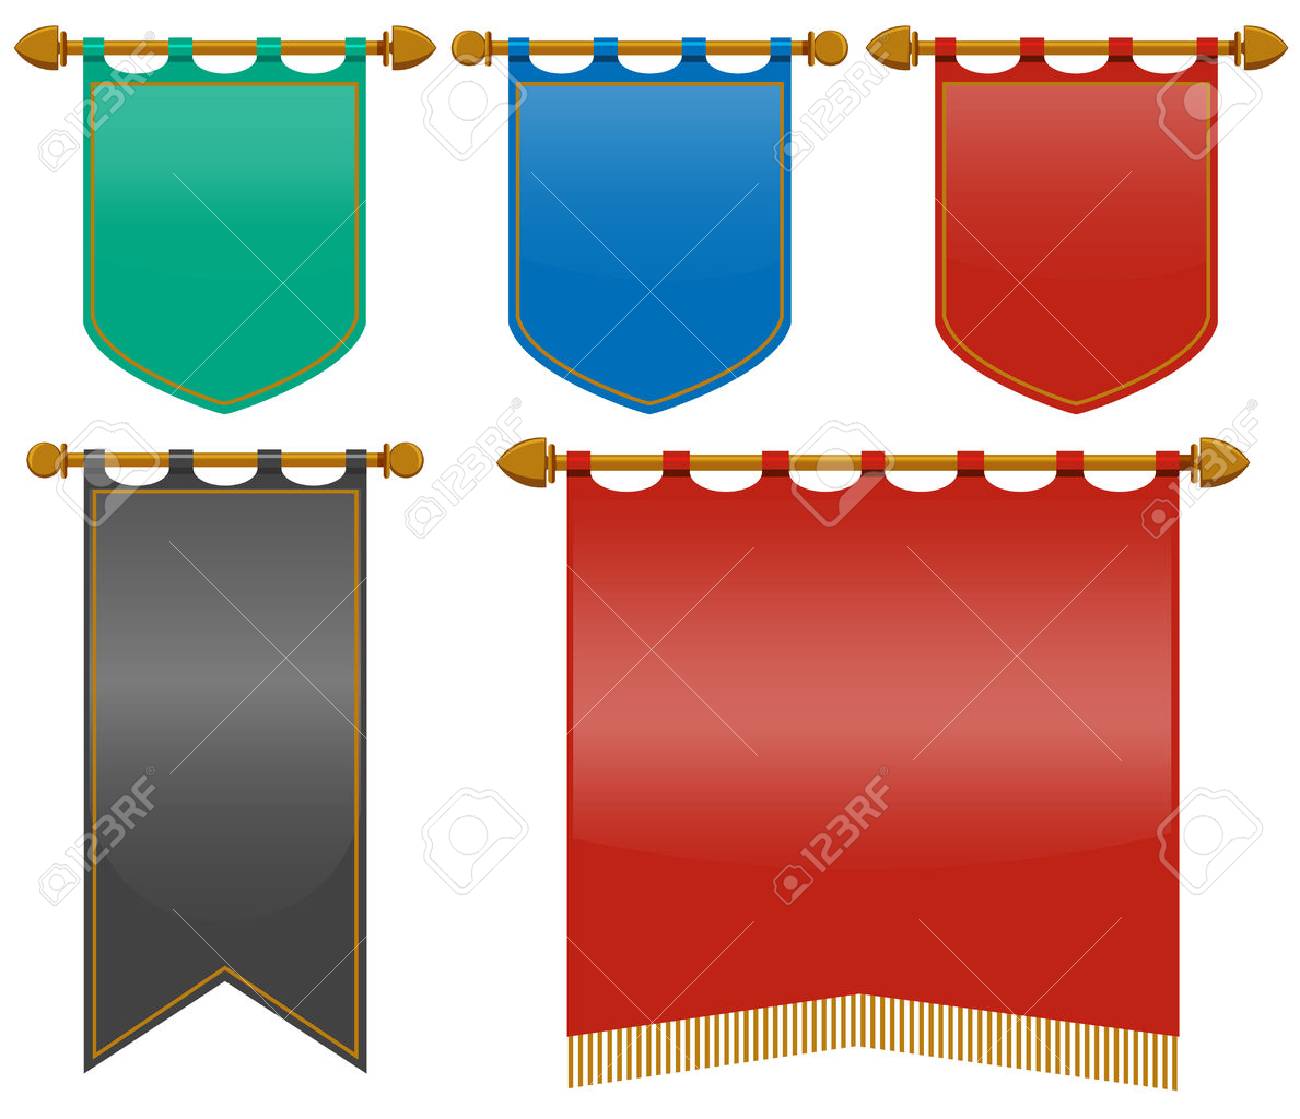 Medieval banner clipart